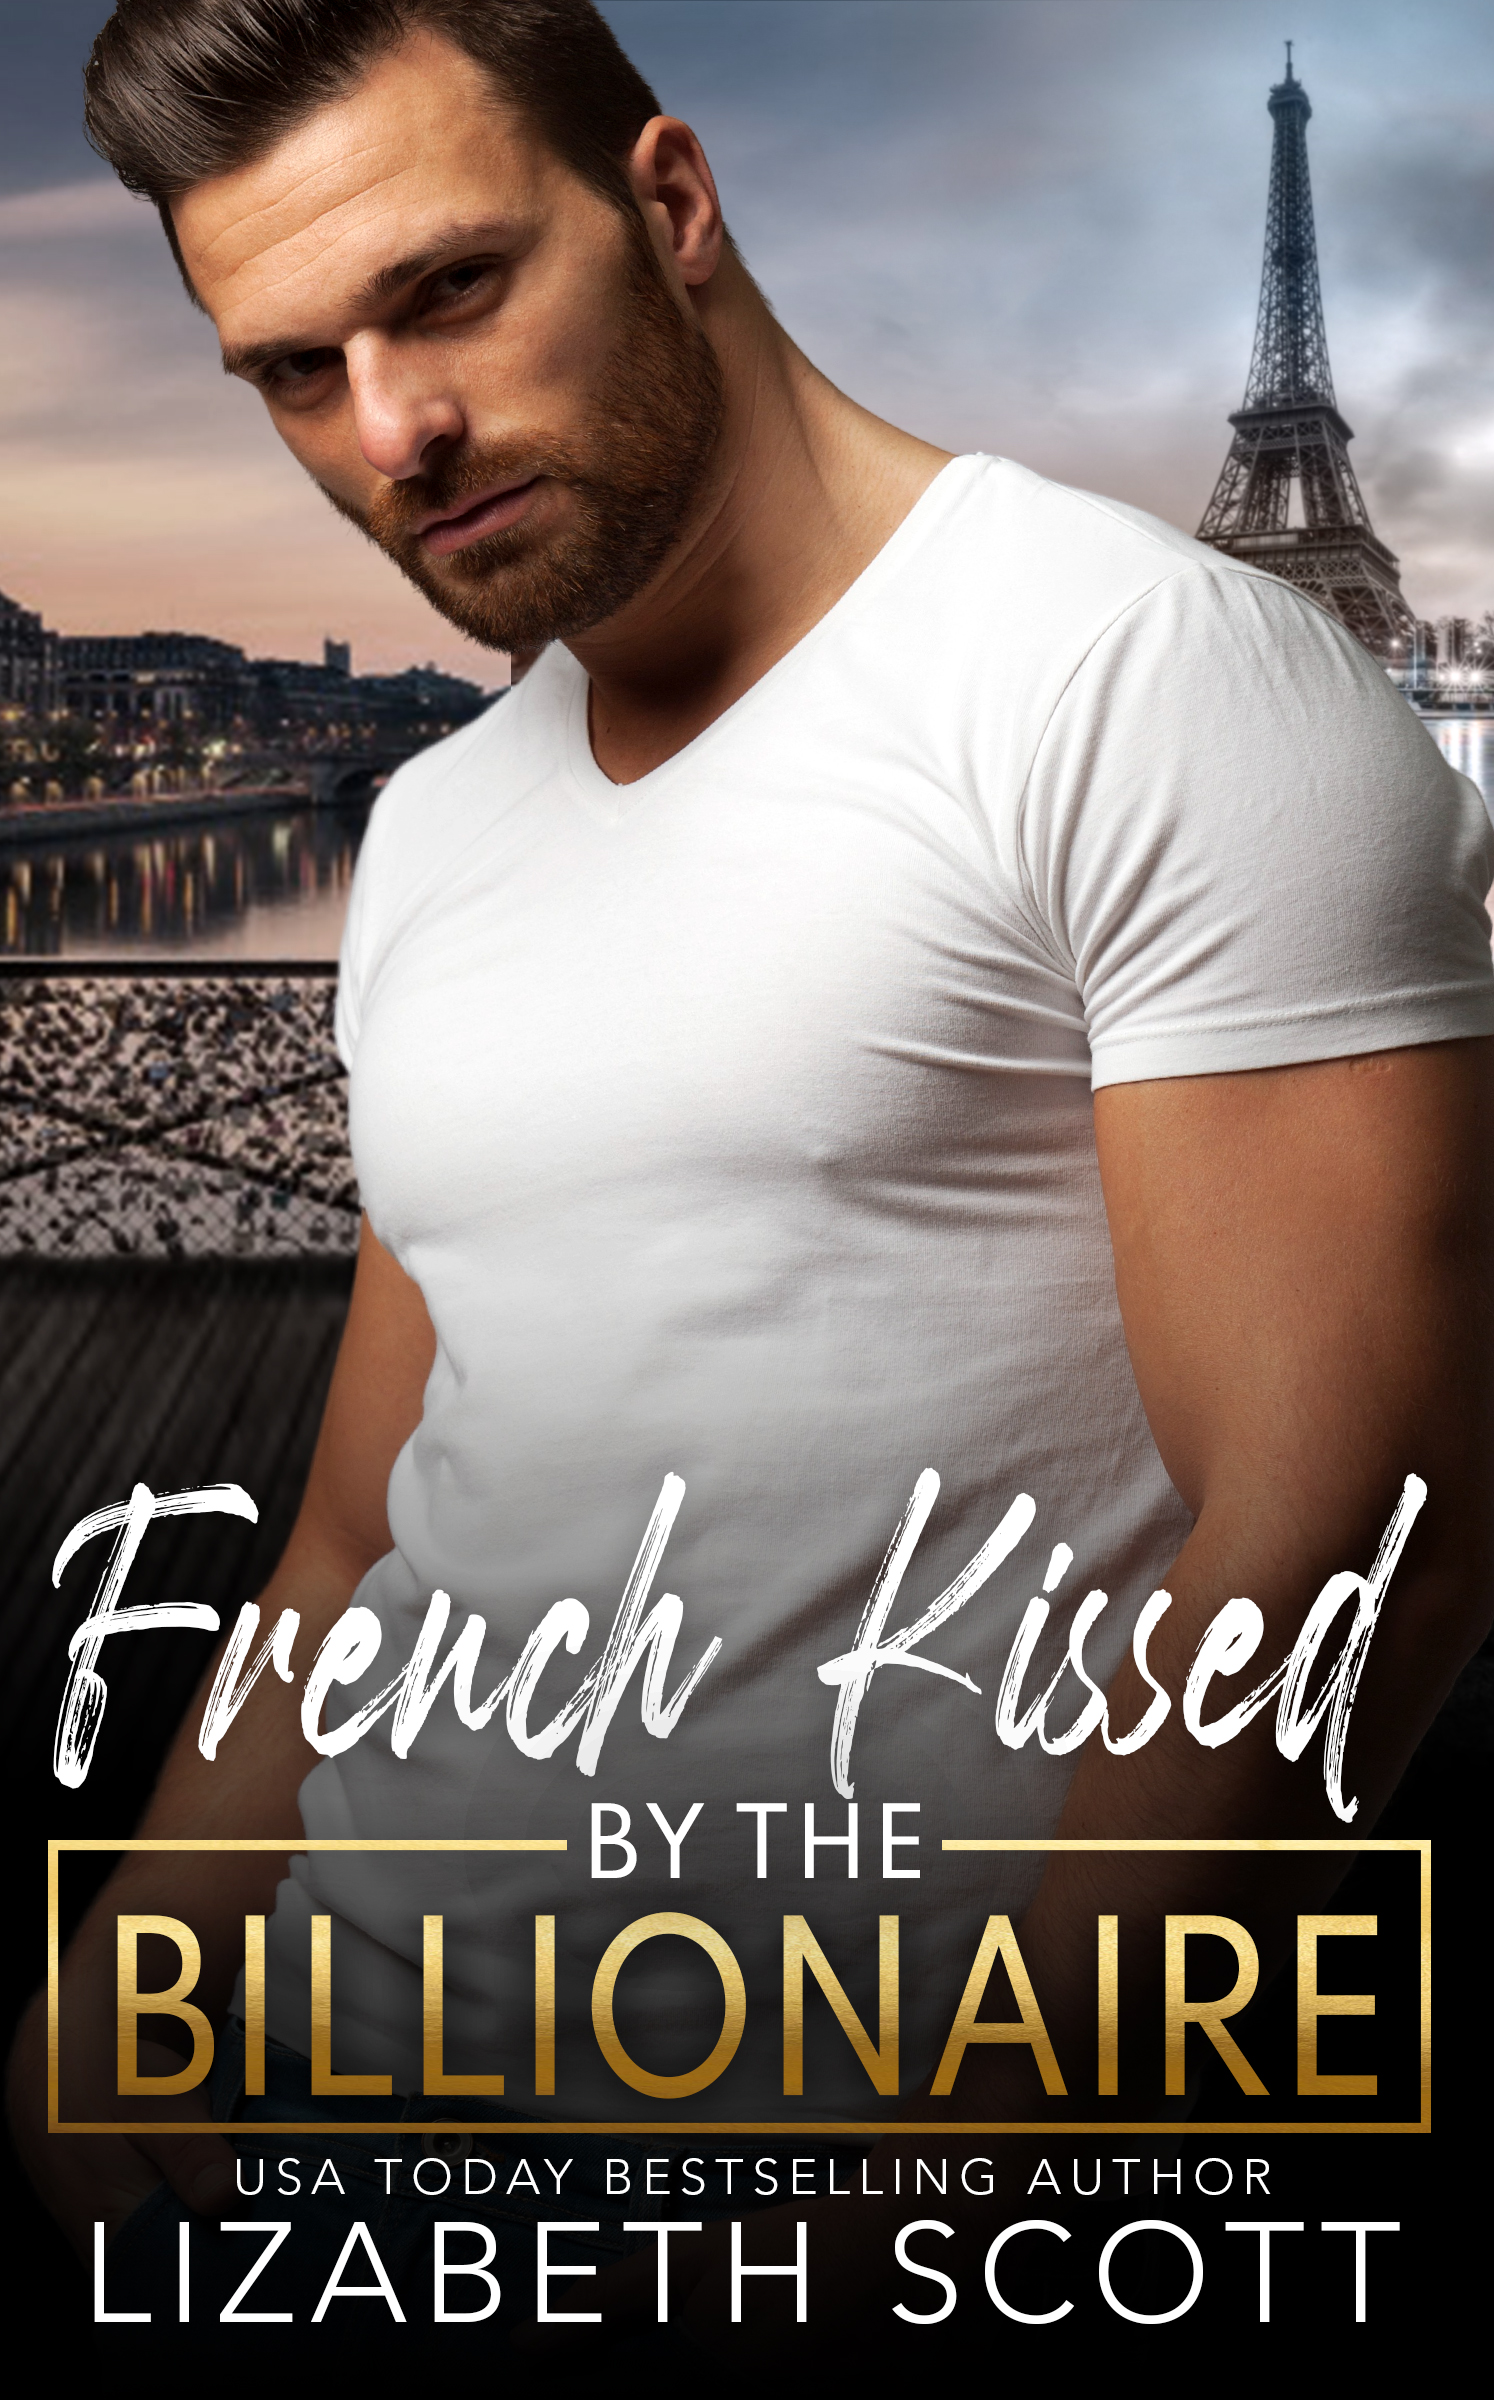 French Kissed by the billionaire